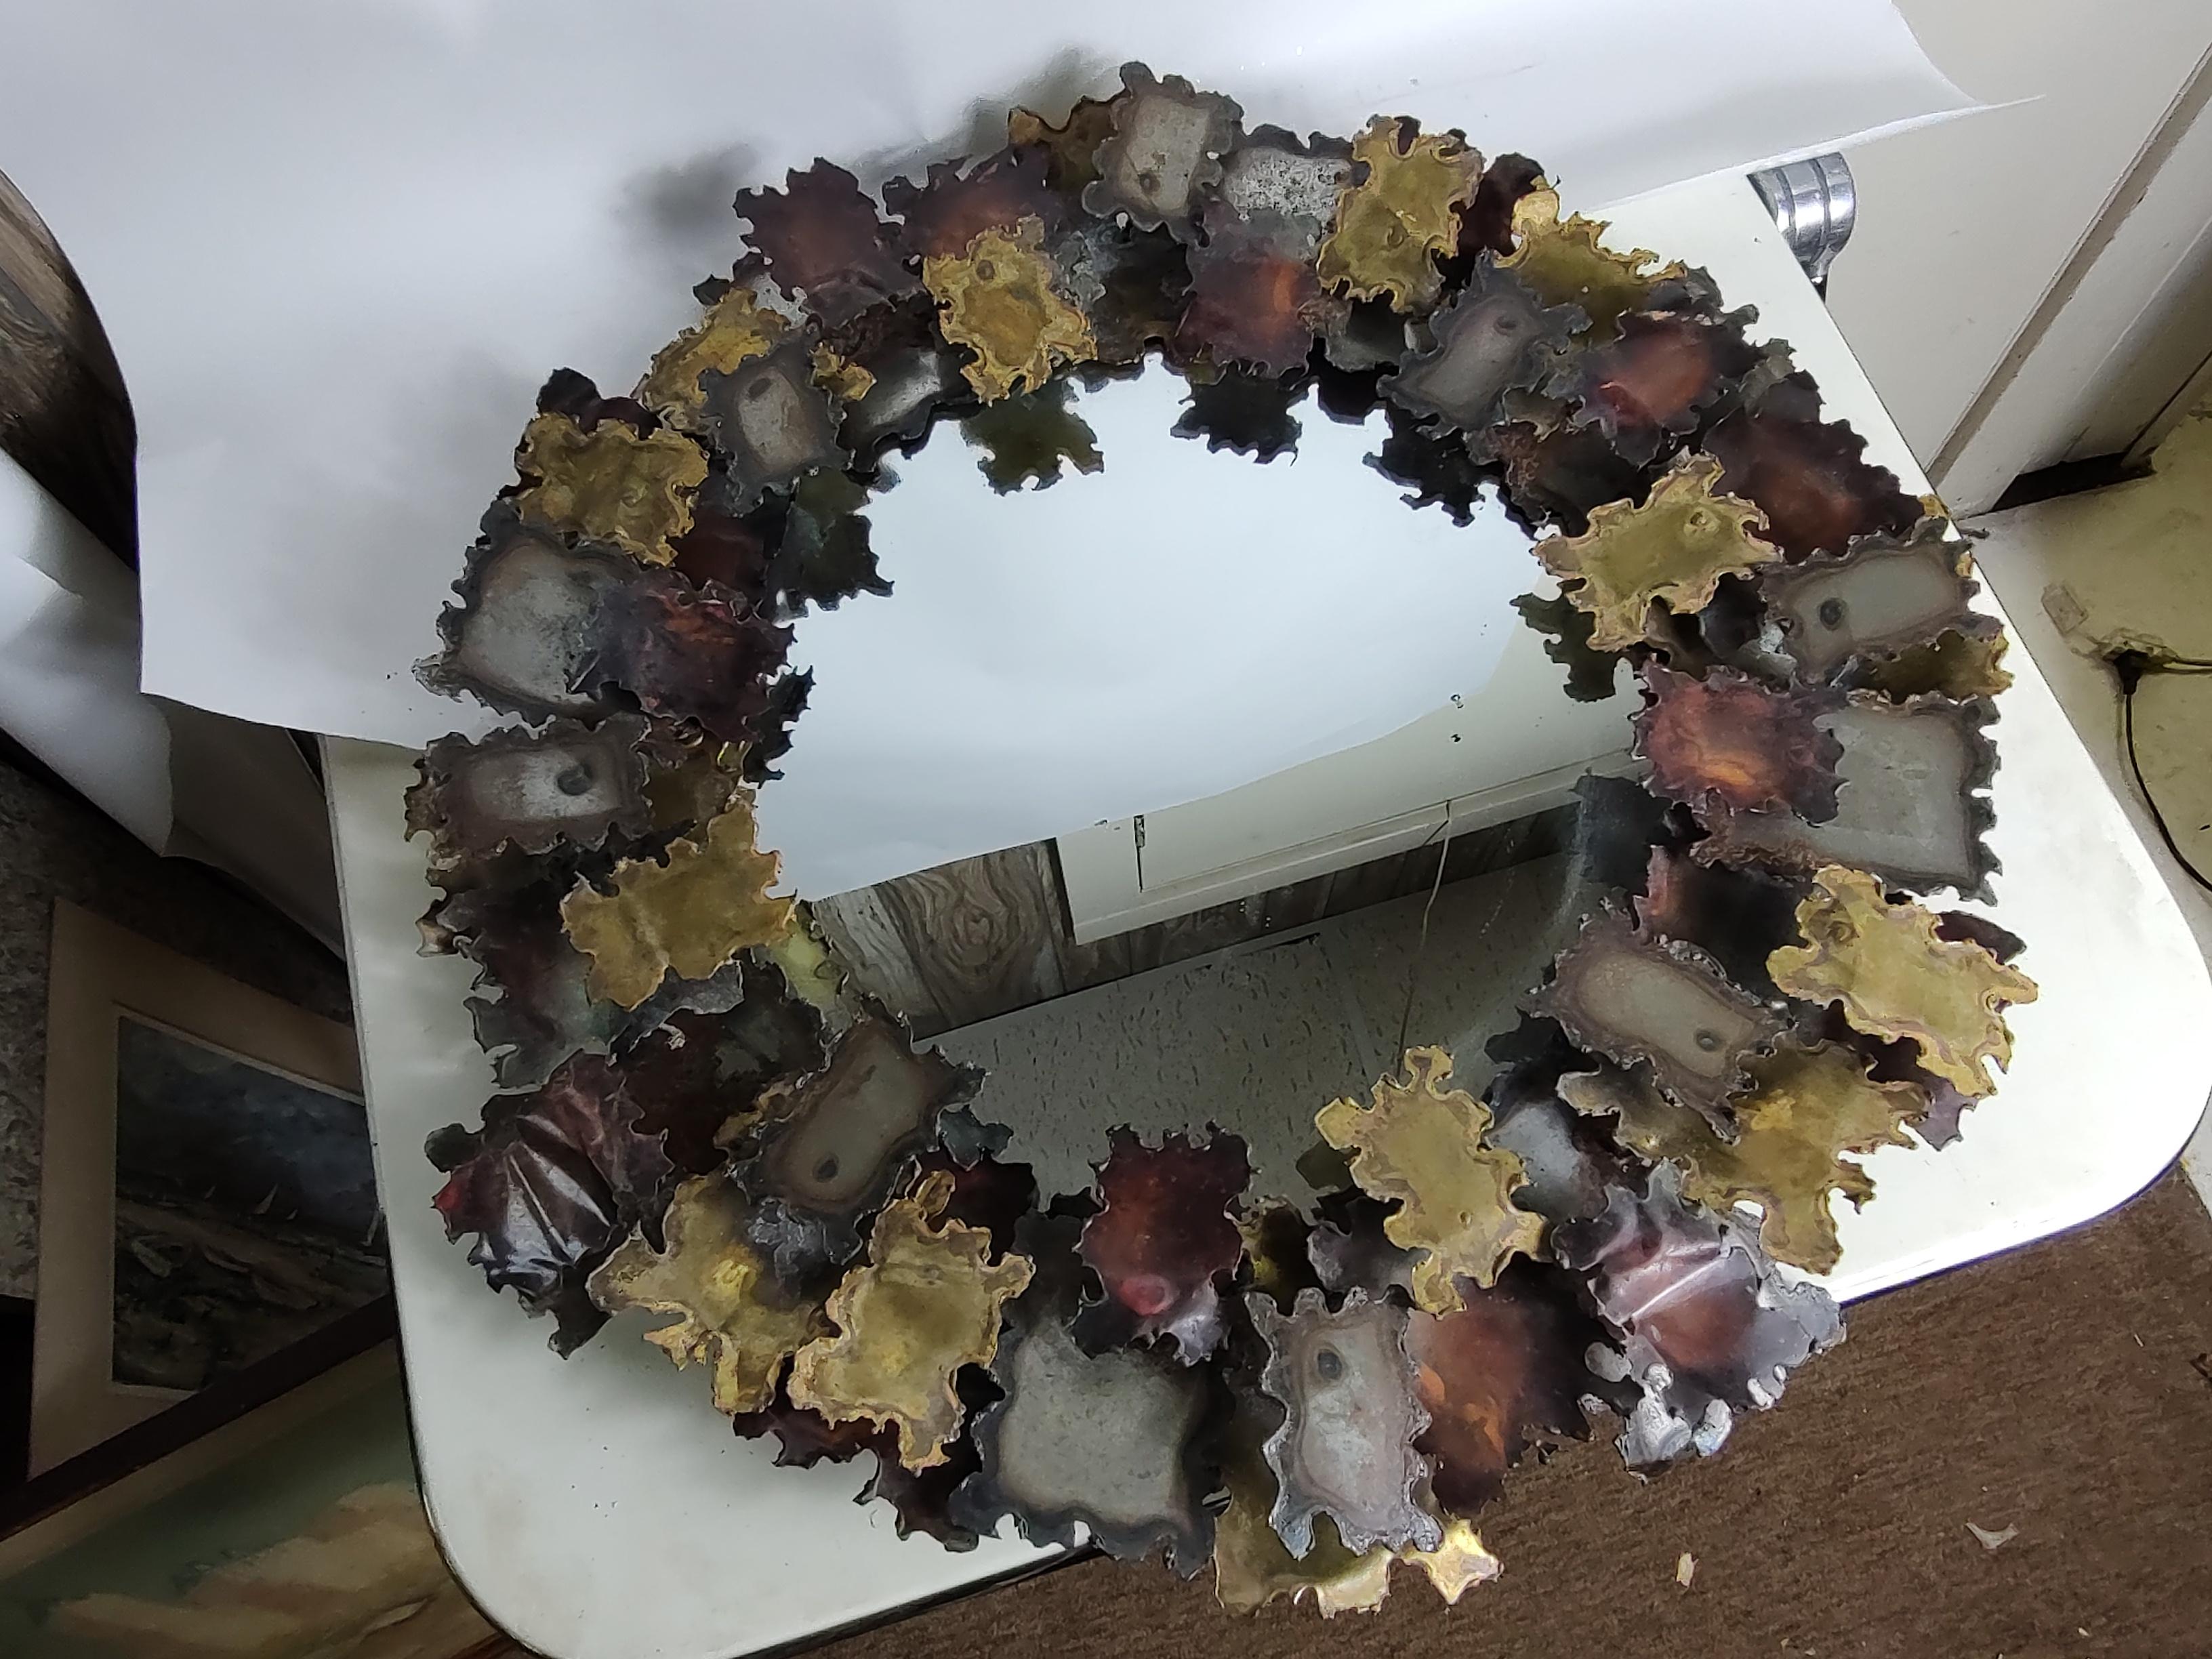 Fabulous torch cut and welded brutalist mirror possibly by Curtis Jere. Copper Brass and Steel cut pieces assembled and surrounding the mirror reminiscint of fall leaves. In excellent vintage condition with minimal wear. Can be parcel posted.